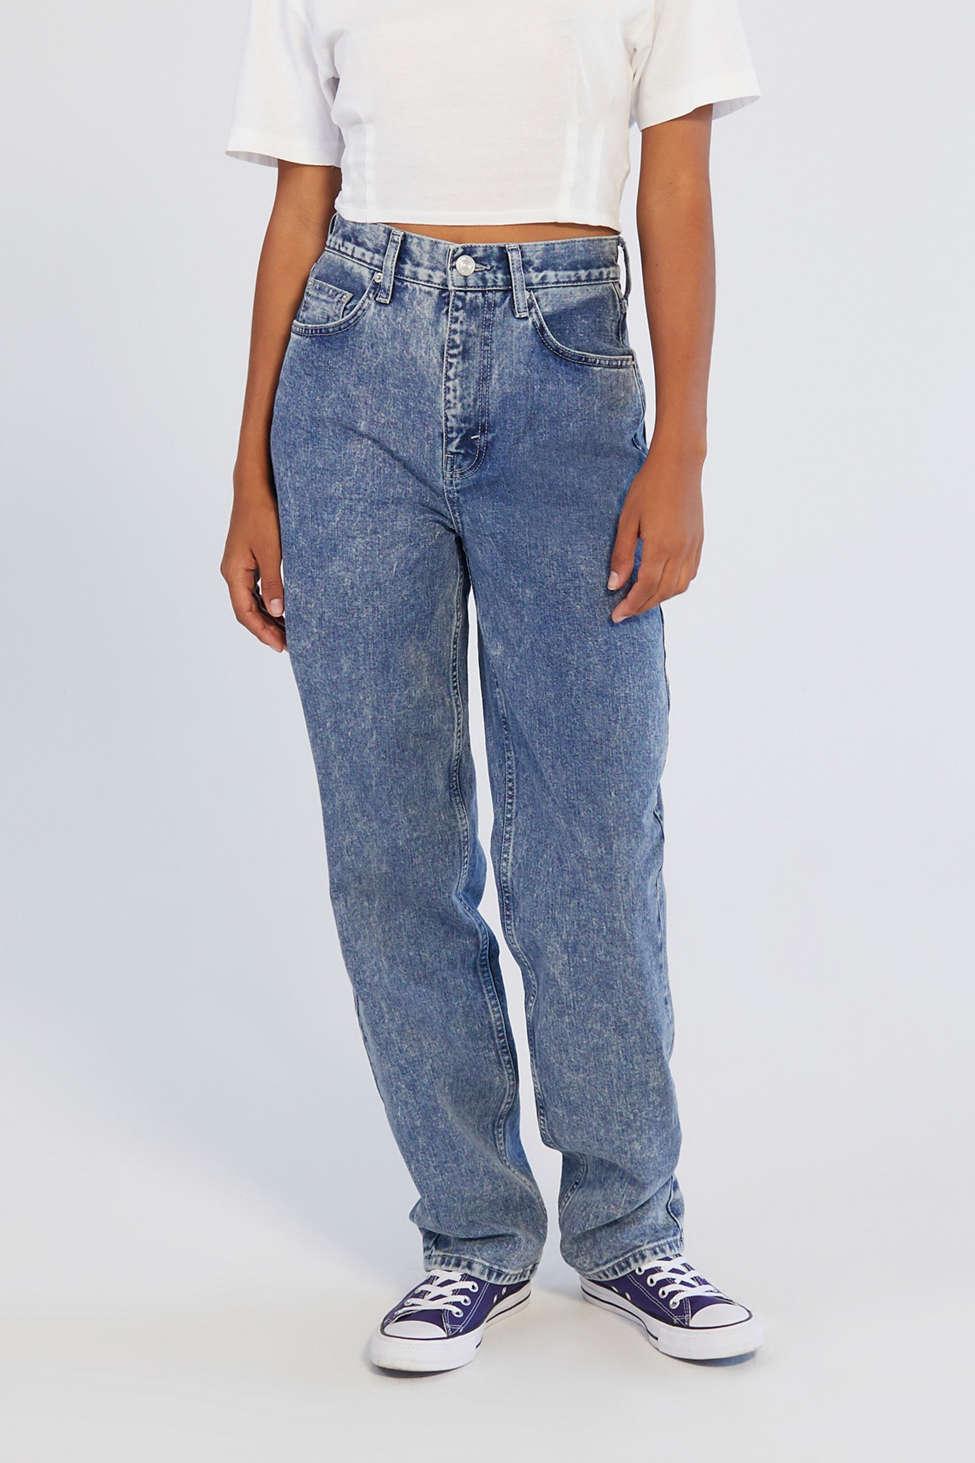 BDG Petite High-Waisted Baggy Jean – Medium Wash  High waisted baggy jeans,  Cute casual outfits, Mom jeans outfit